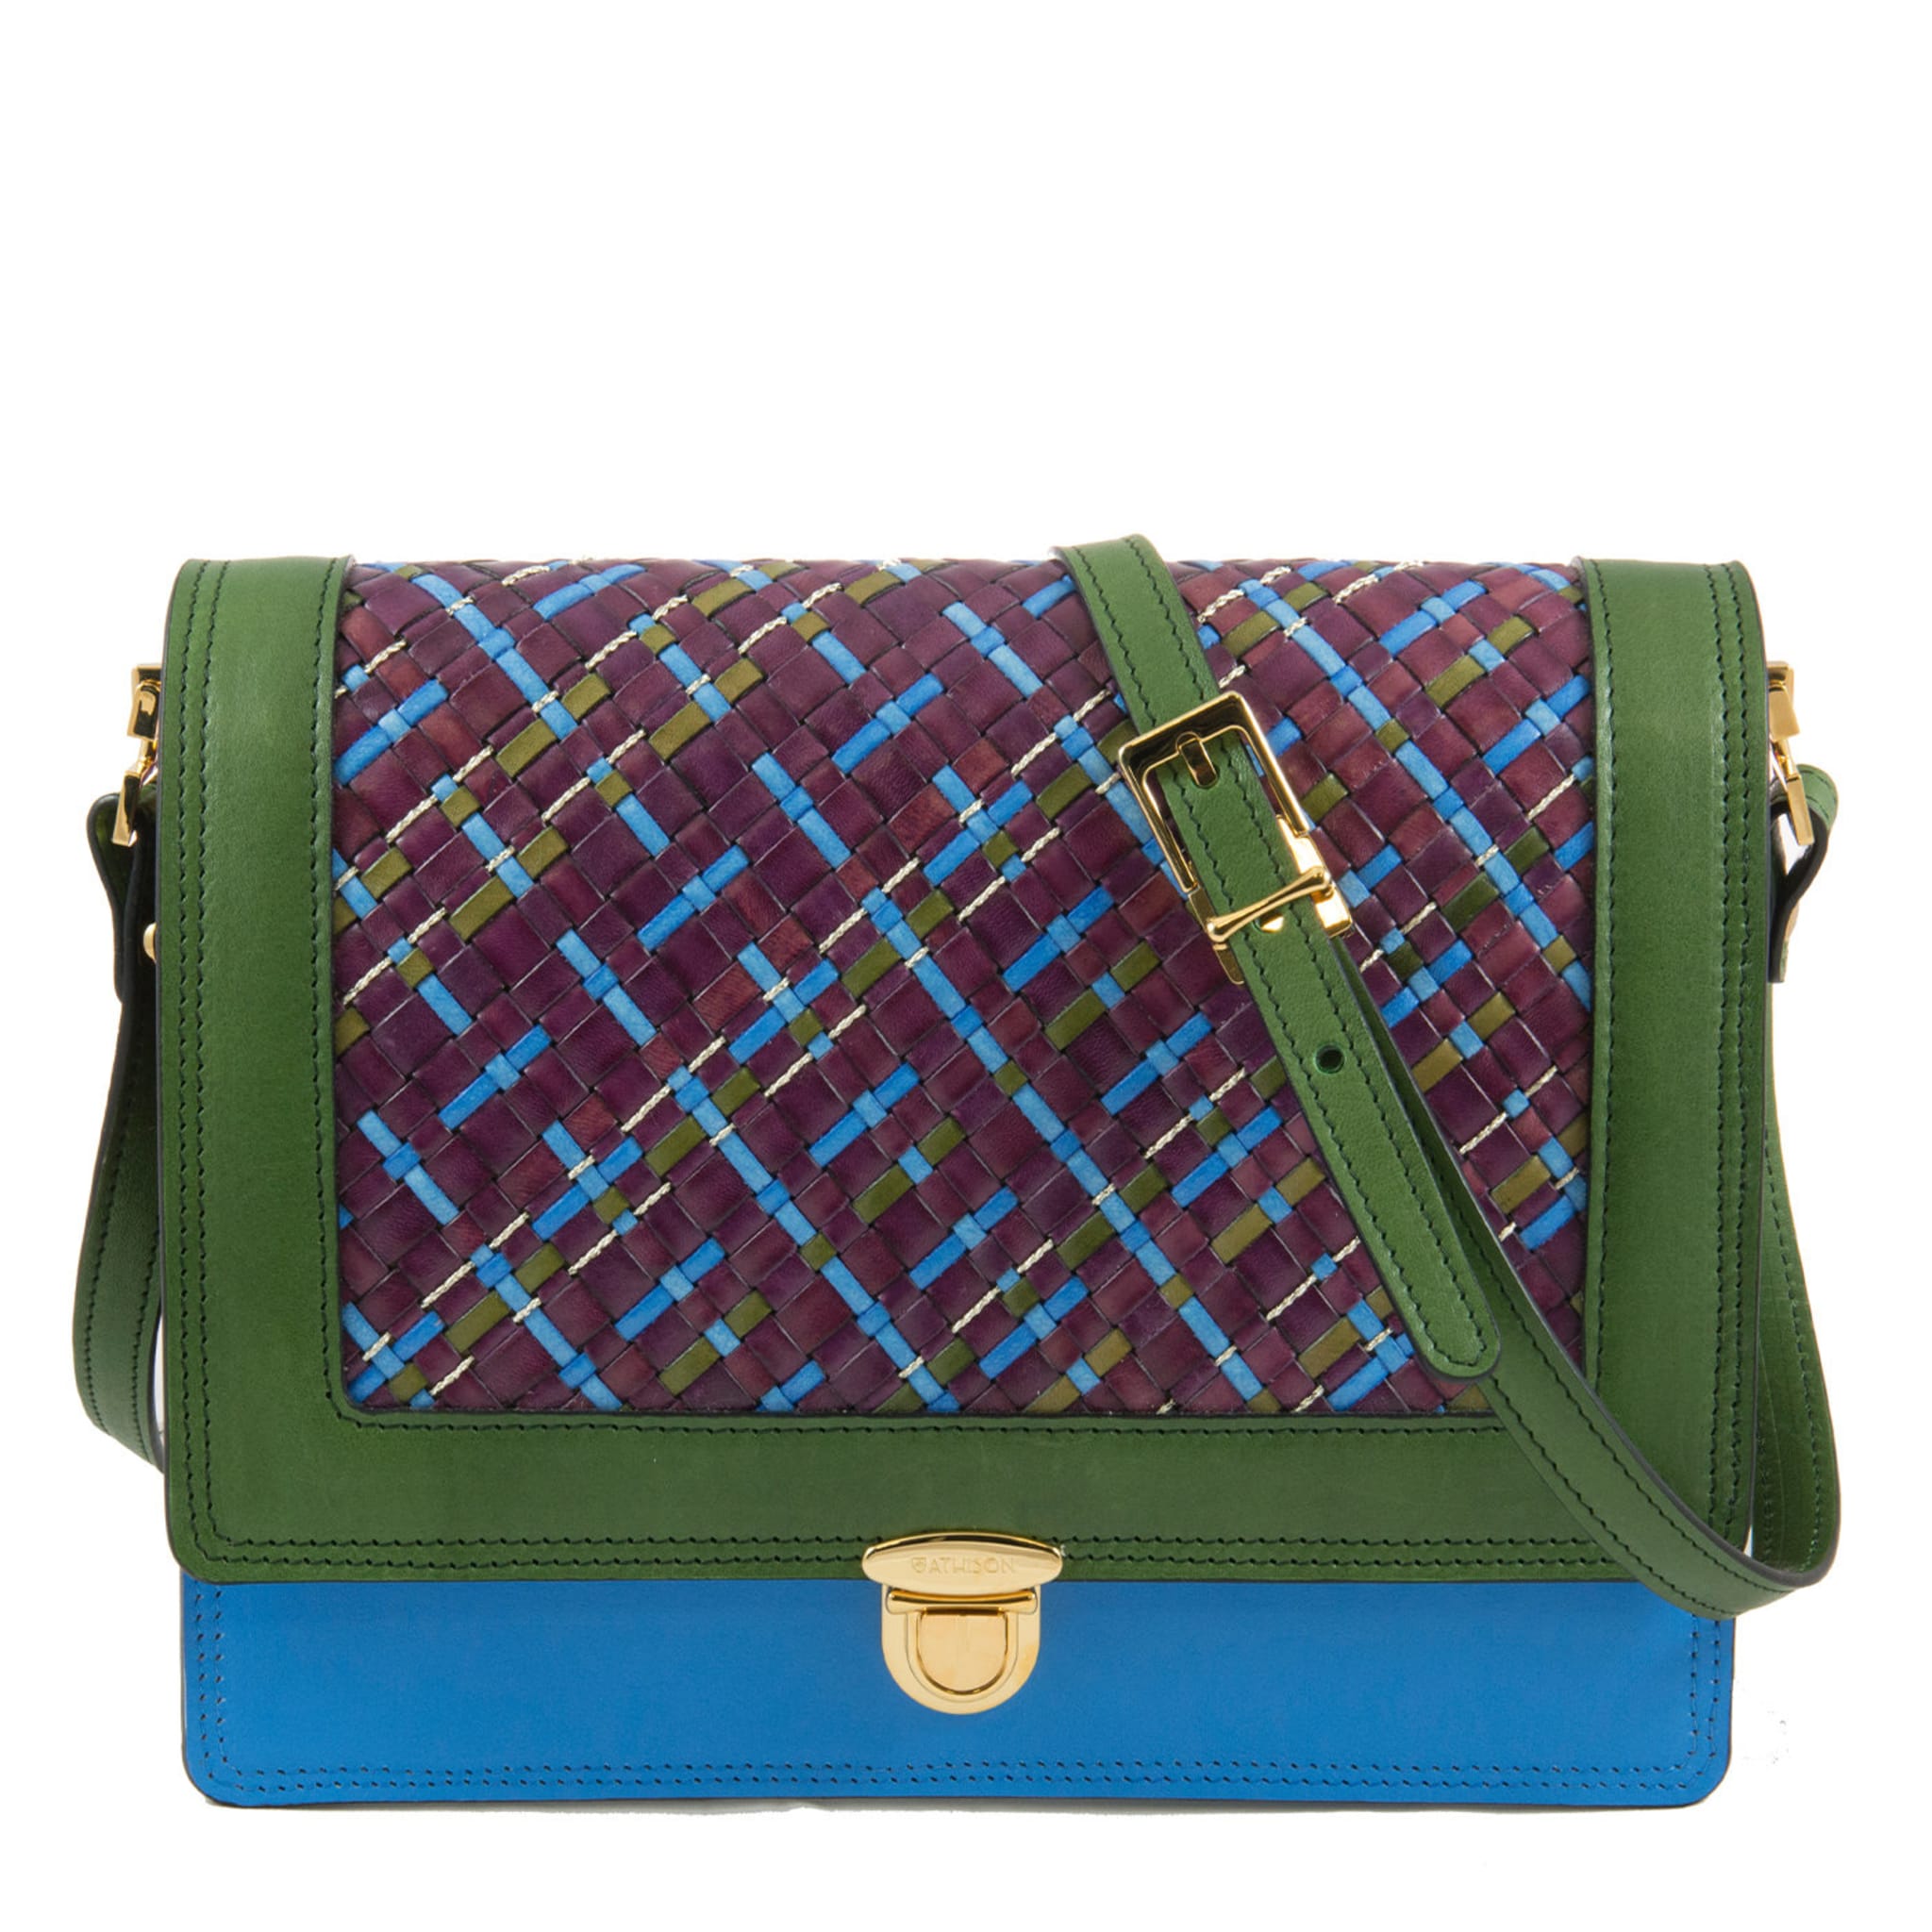 Braided Leather and Copper Crossbody Bag “Quadro” - Green and Light Blue - Main view